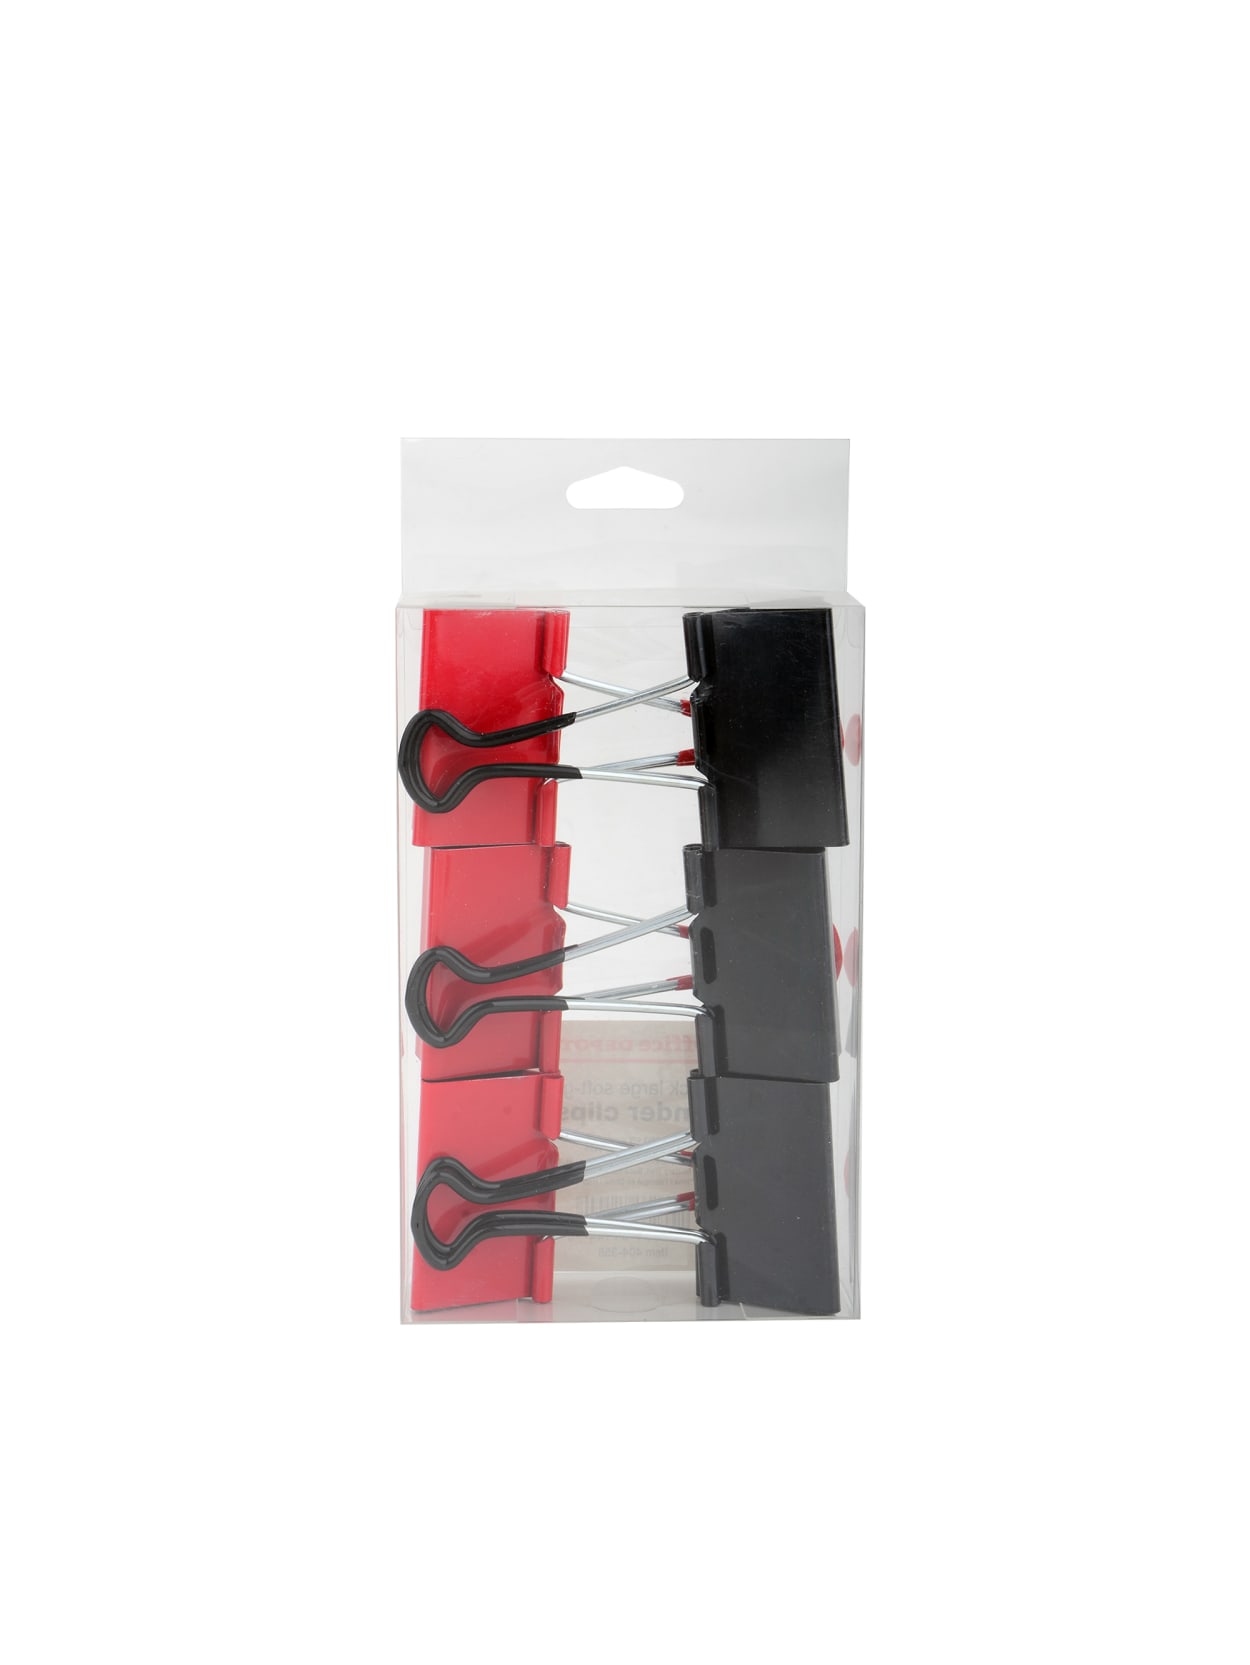 large red binder clips